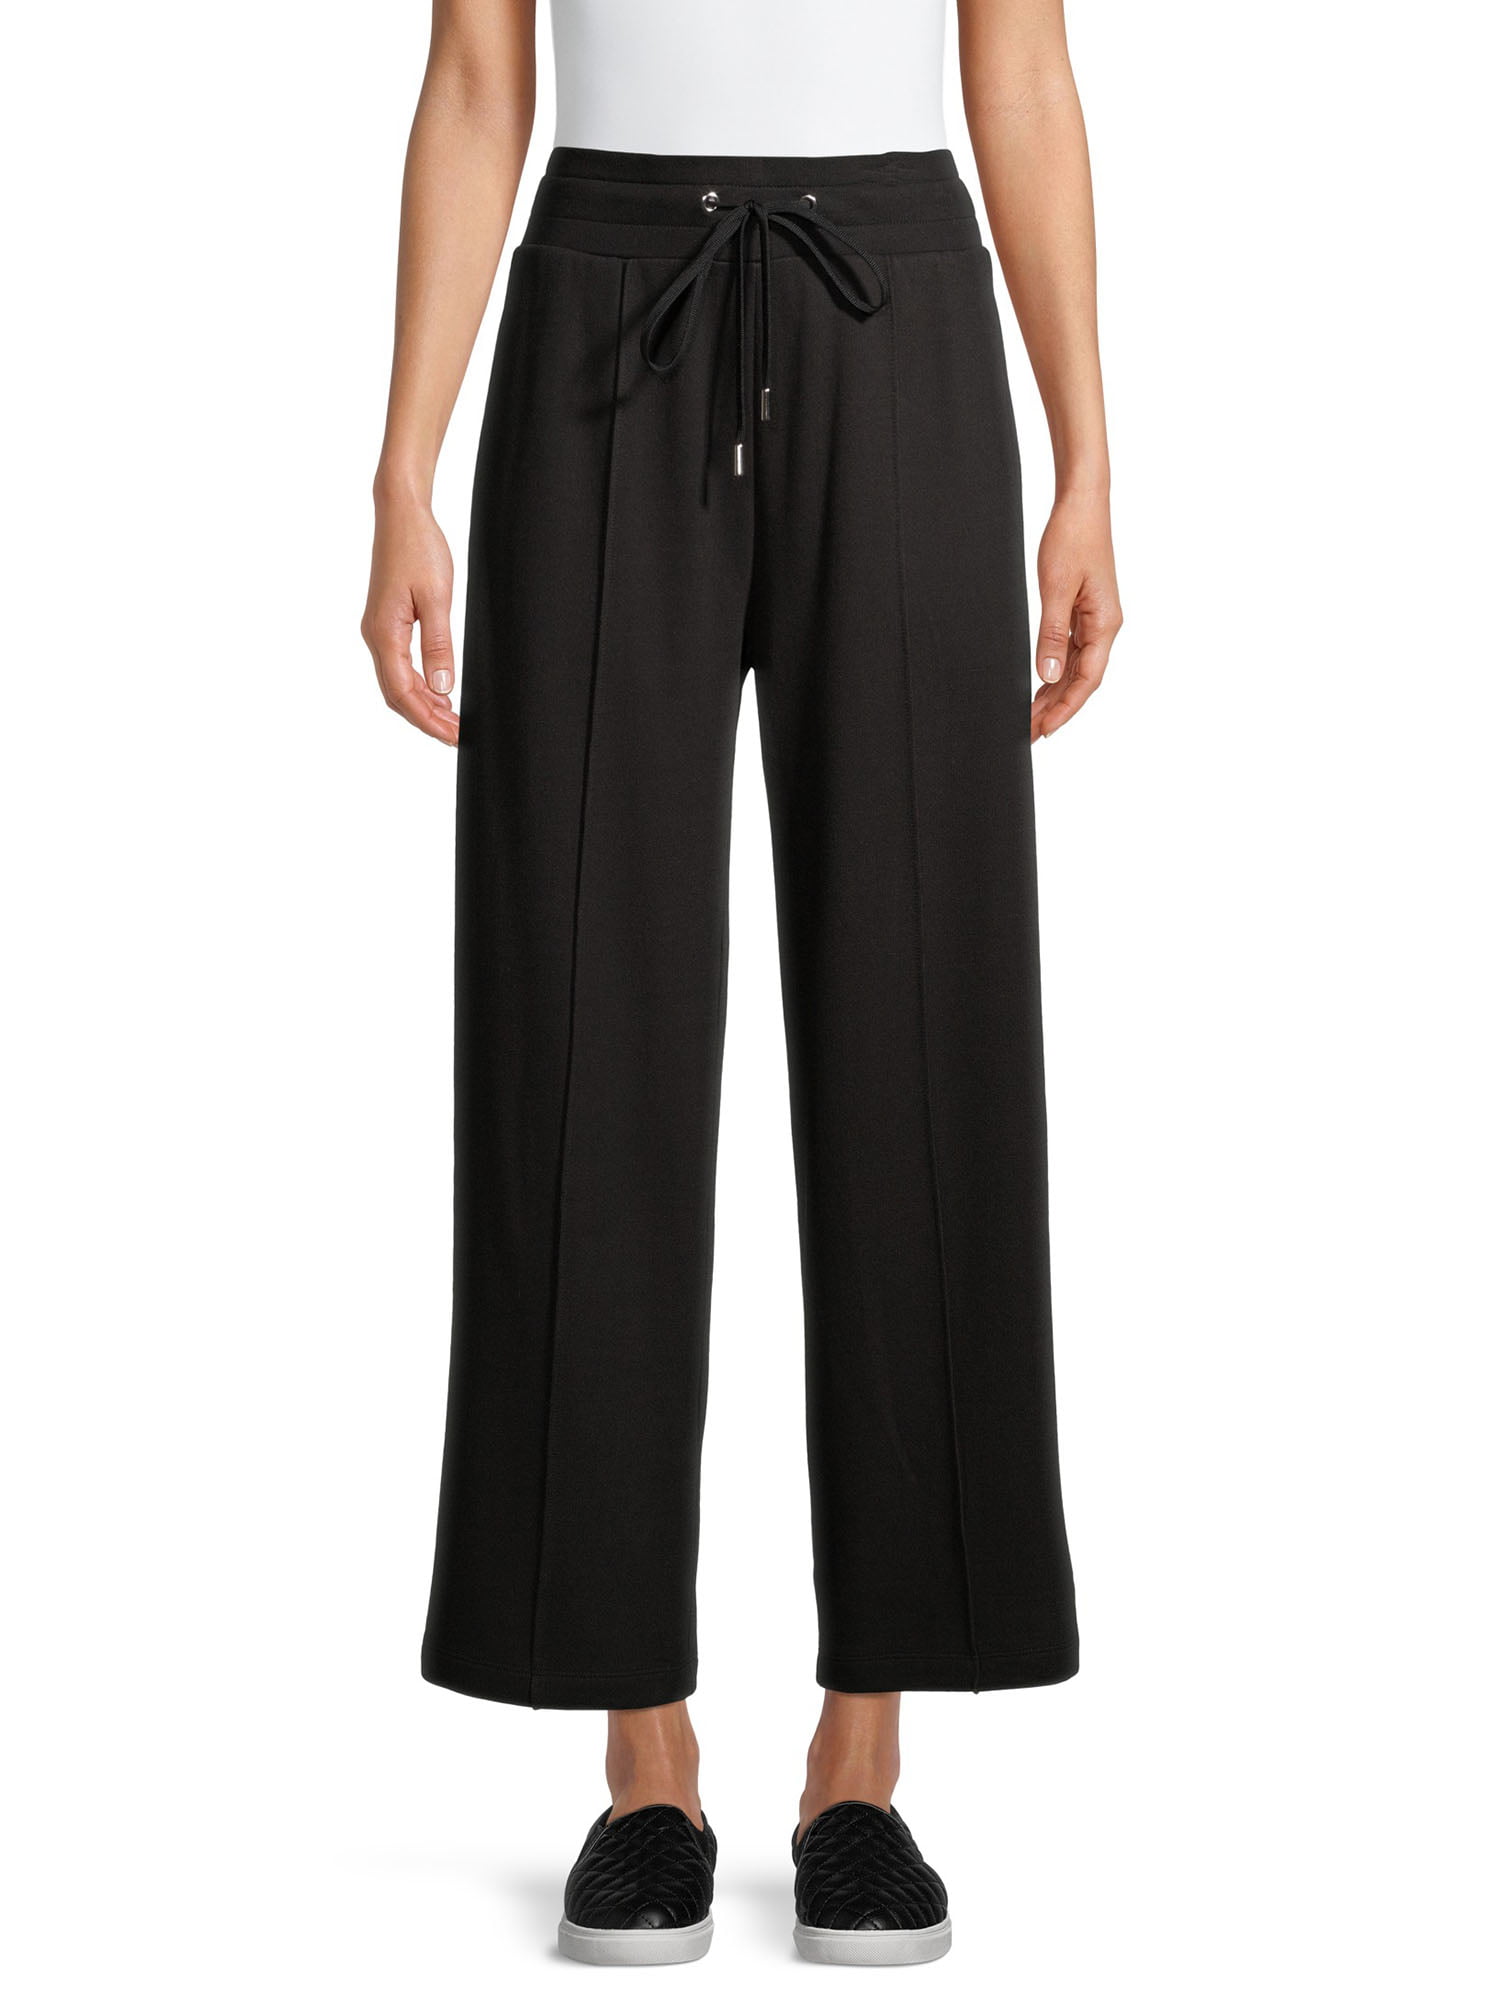 Time and Tru - Time and Tru Women's Wide Leg Knit Pant - Walmart.com ...